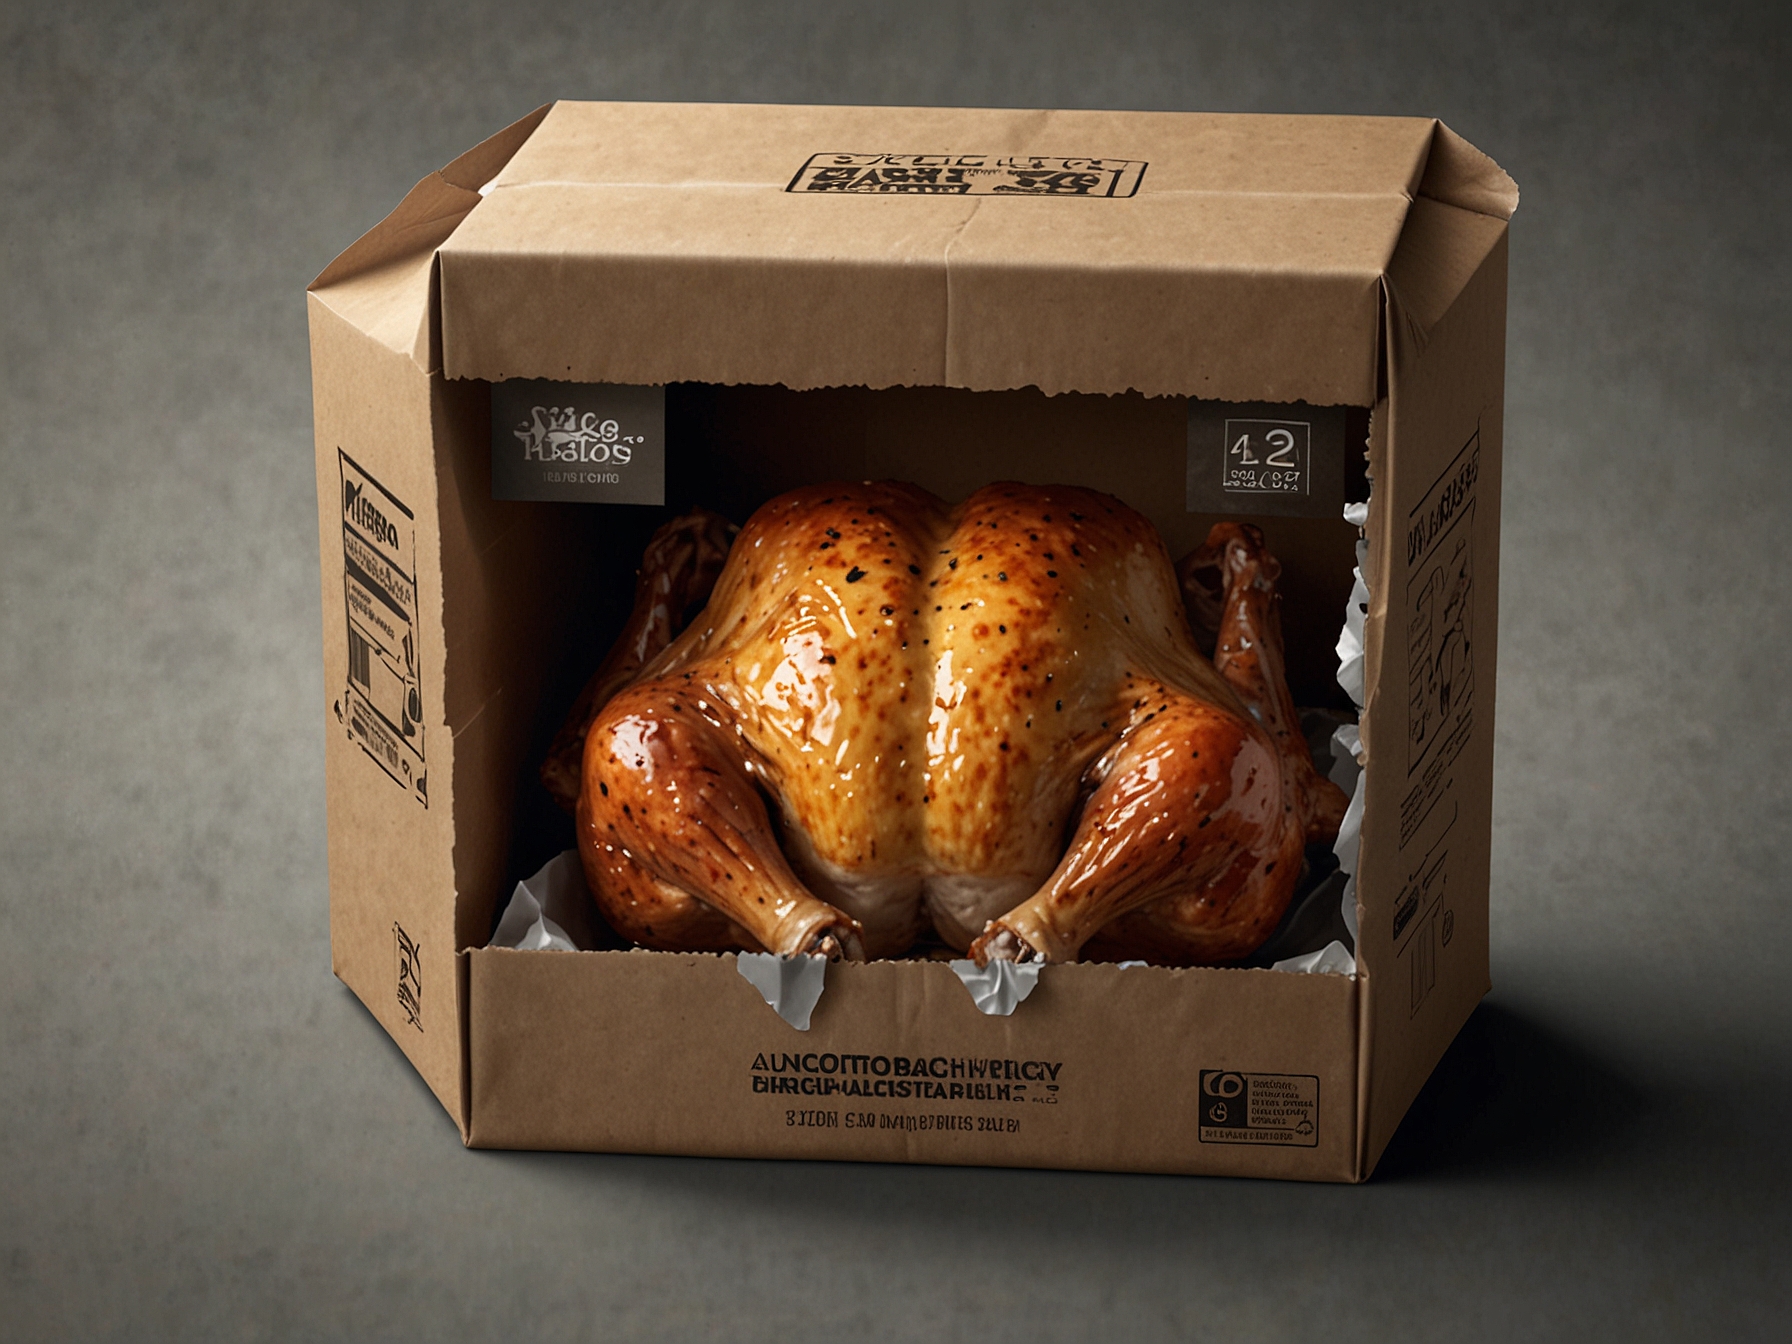 An image of a Costco rotisserie chicken inside the new bagged packaging, highlighting the issues with leaks and moisture retention that customers are complaining about.